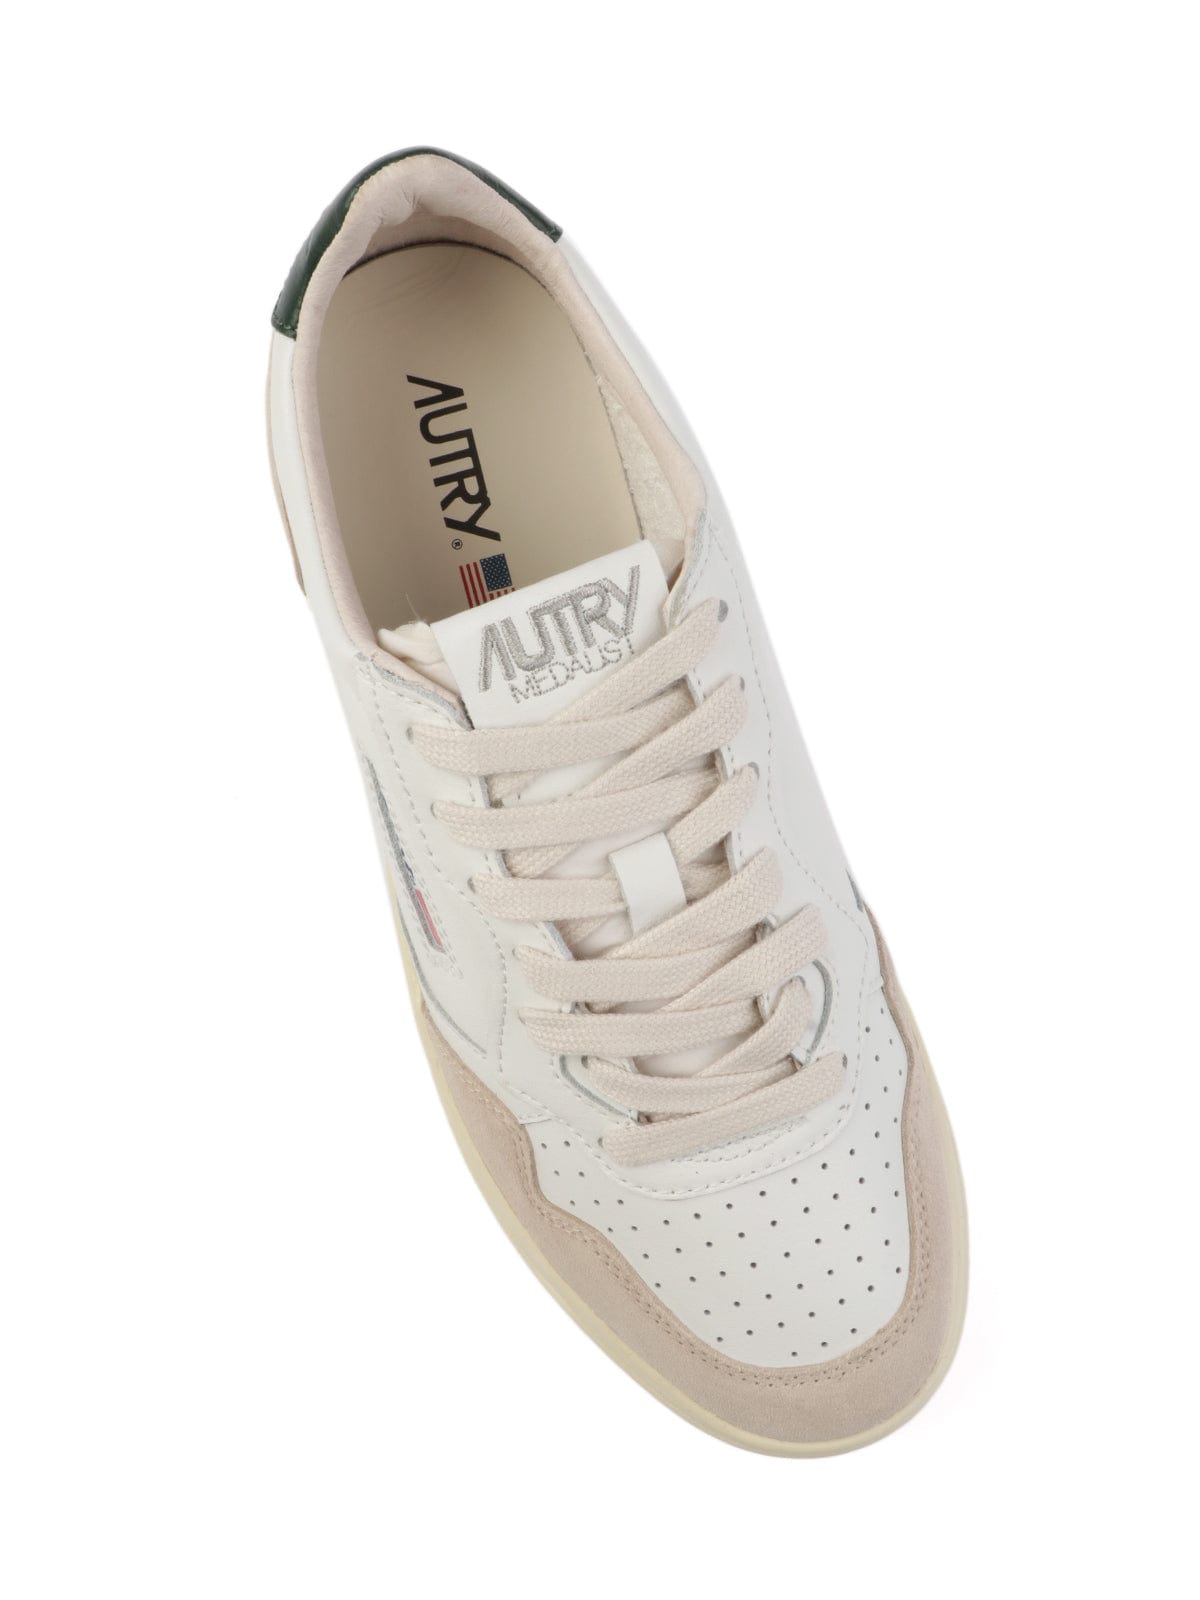 Autry Medalist Low Man Leather Suede White Mountain